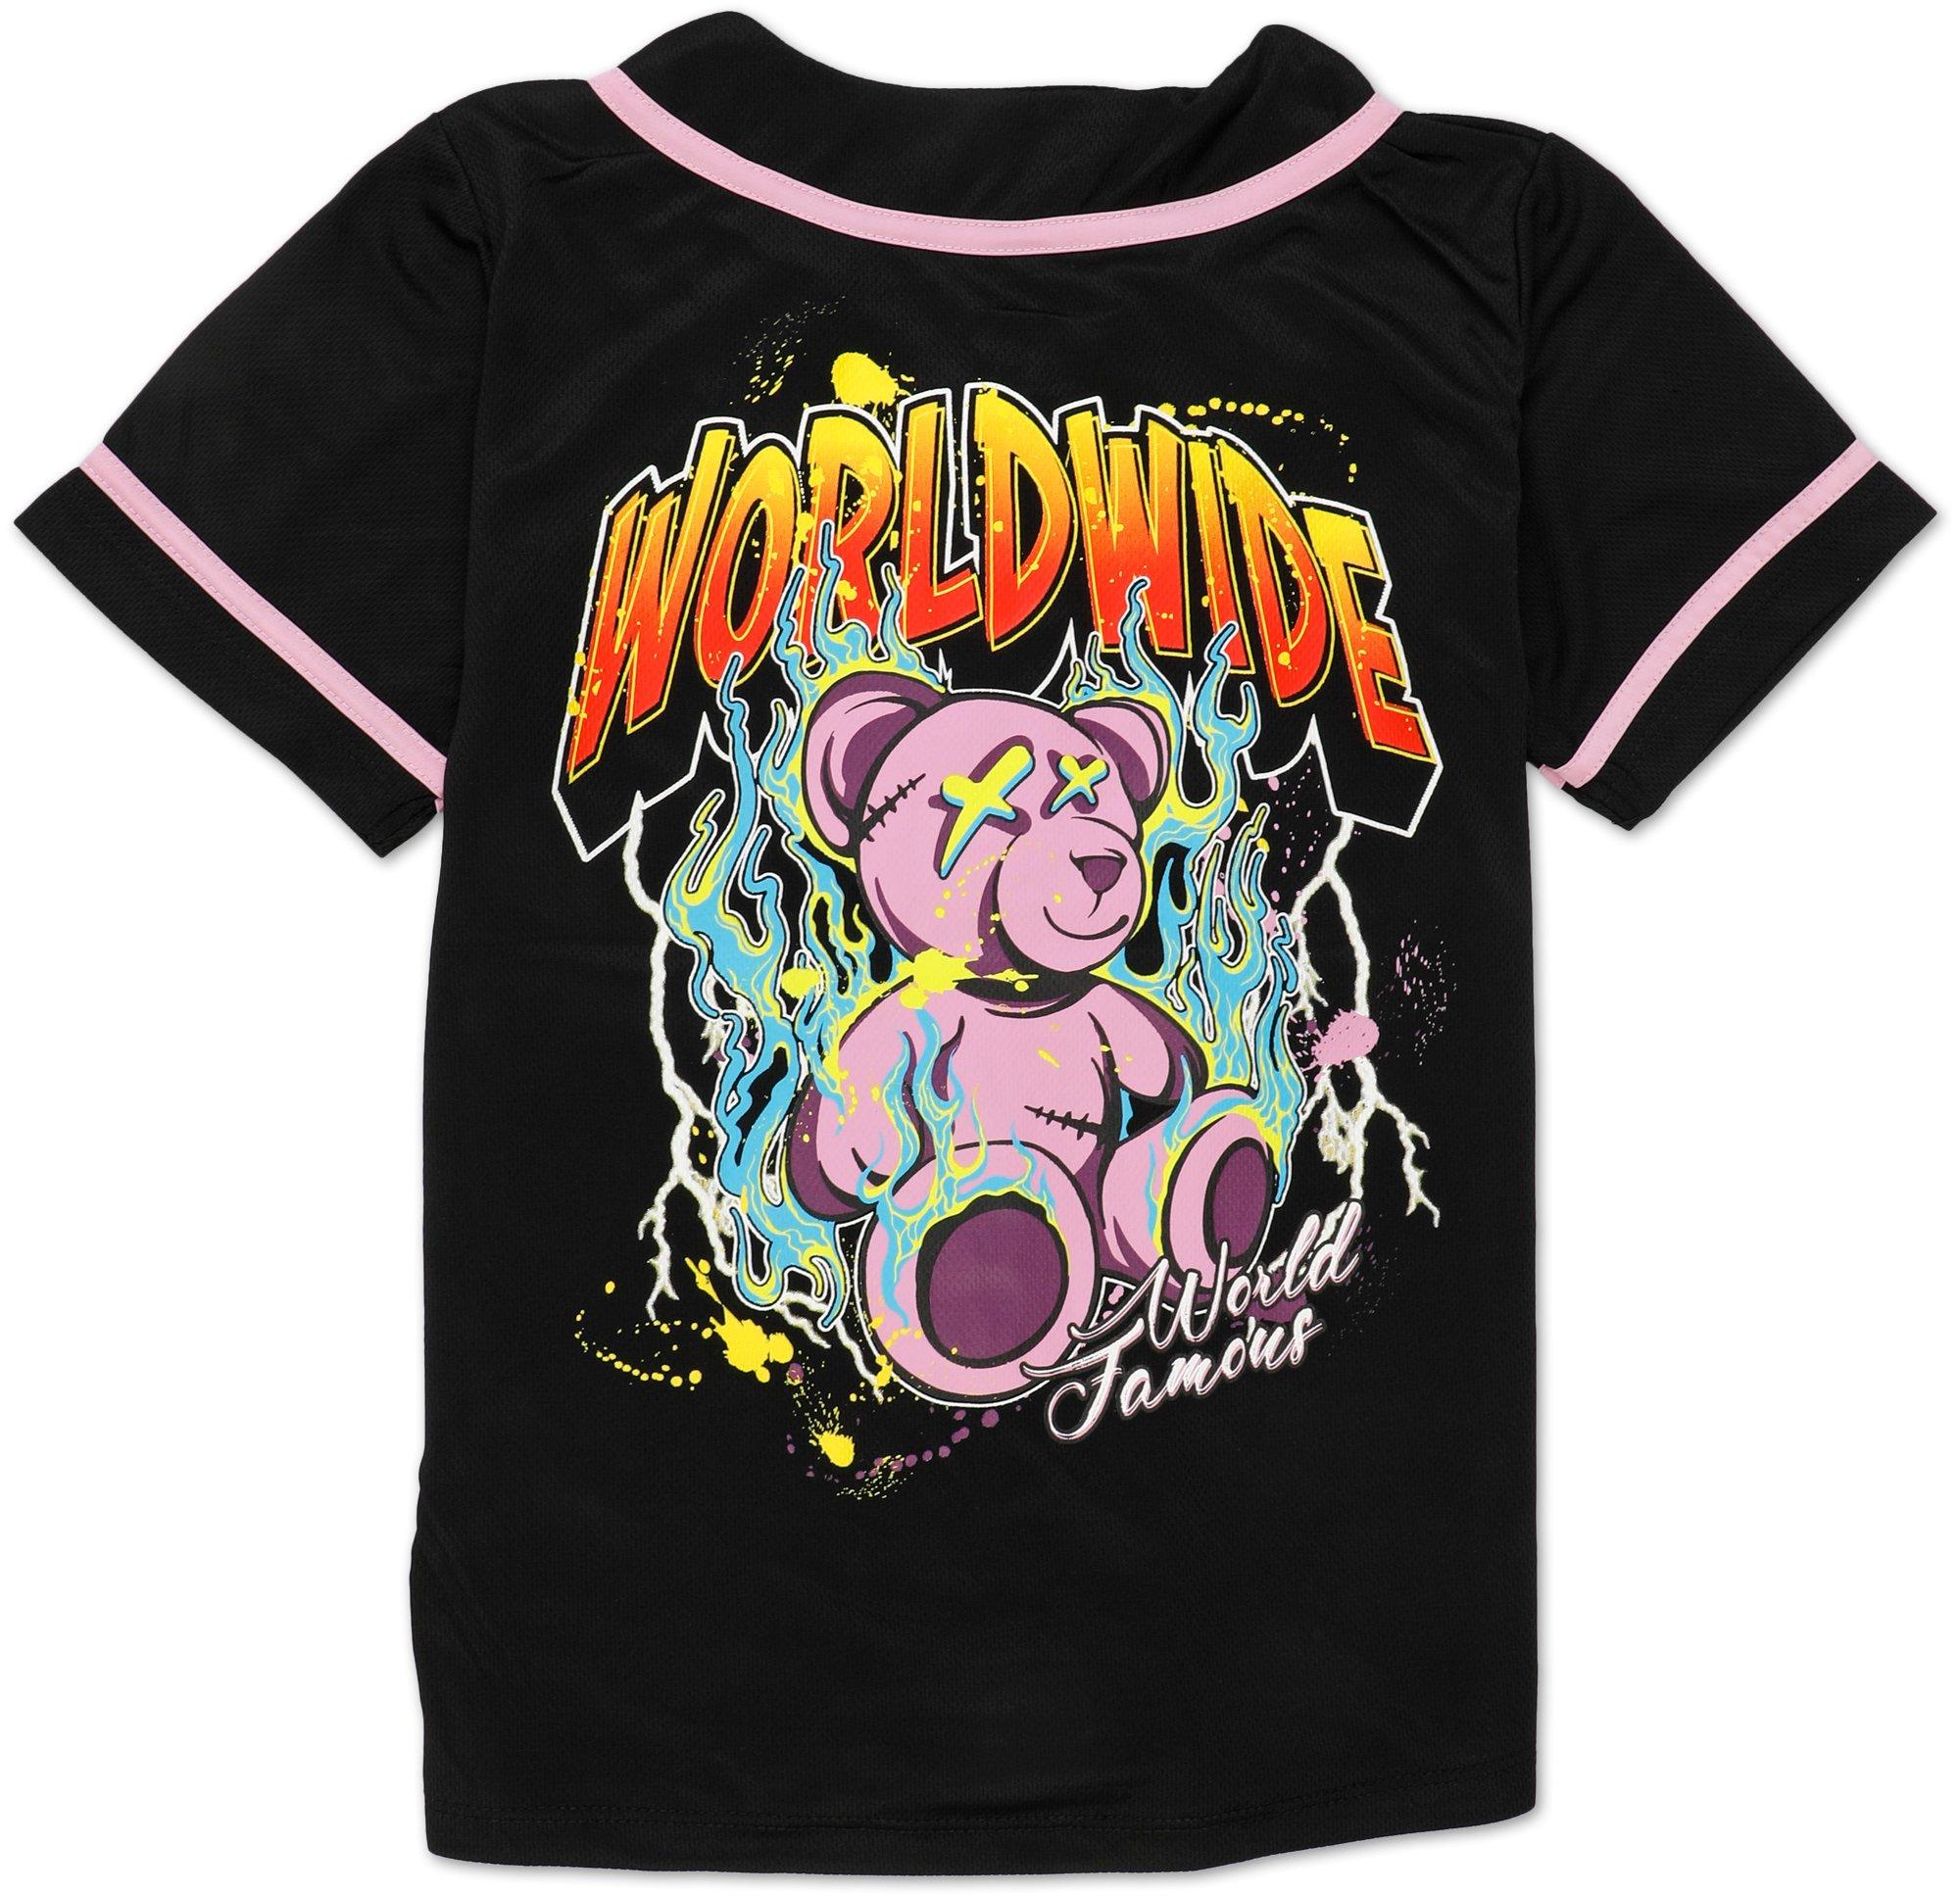 Boys World Wide Graphic Jersey